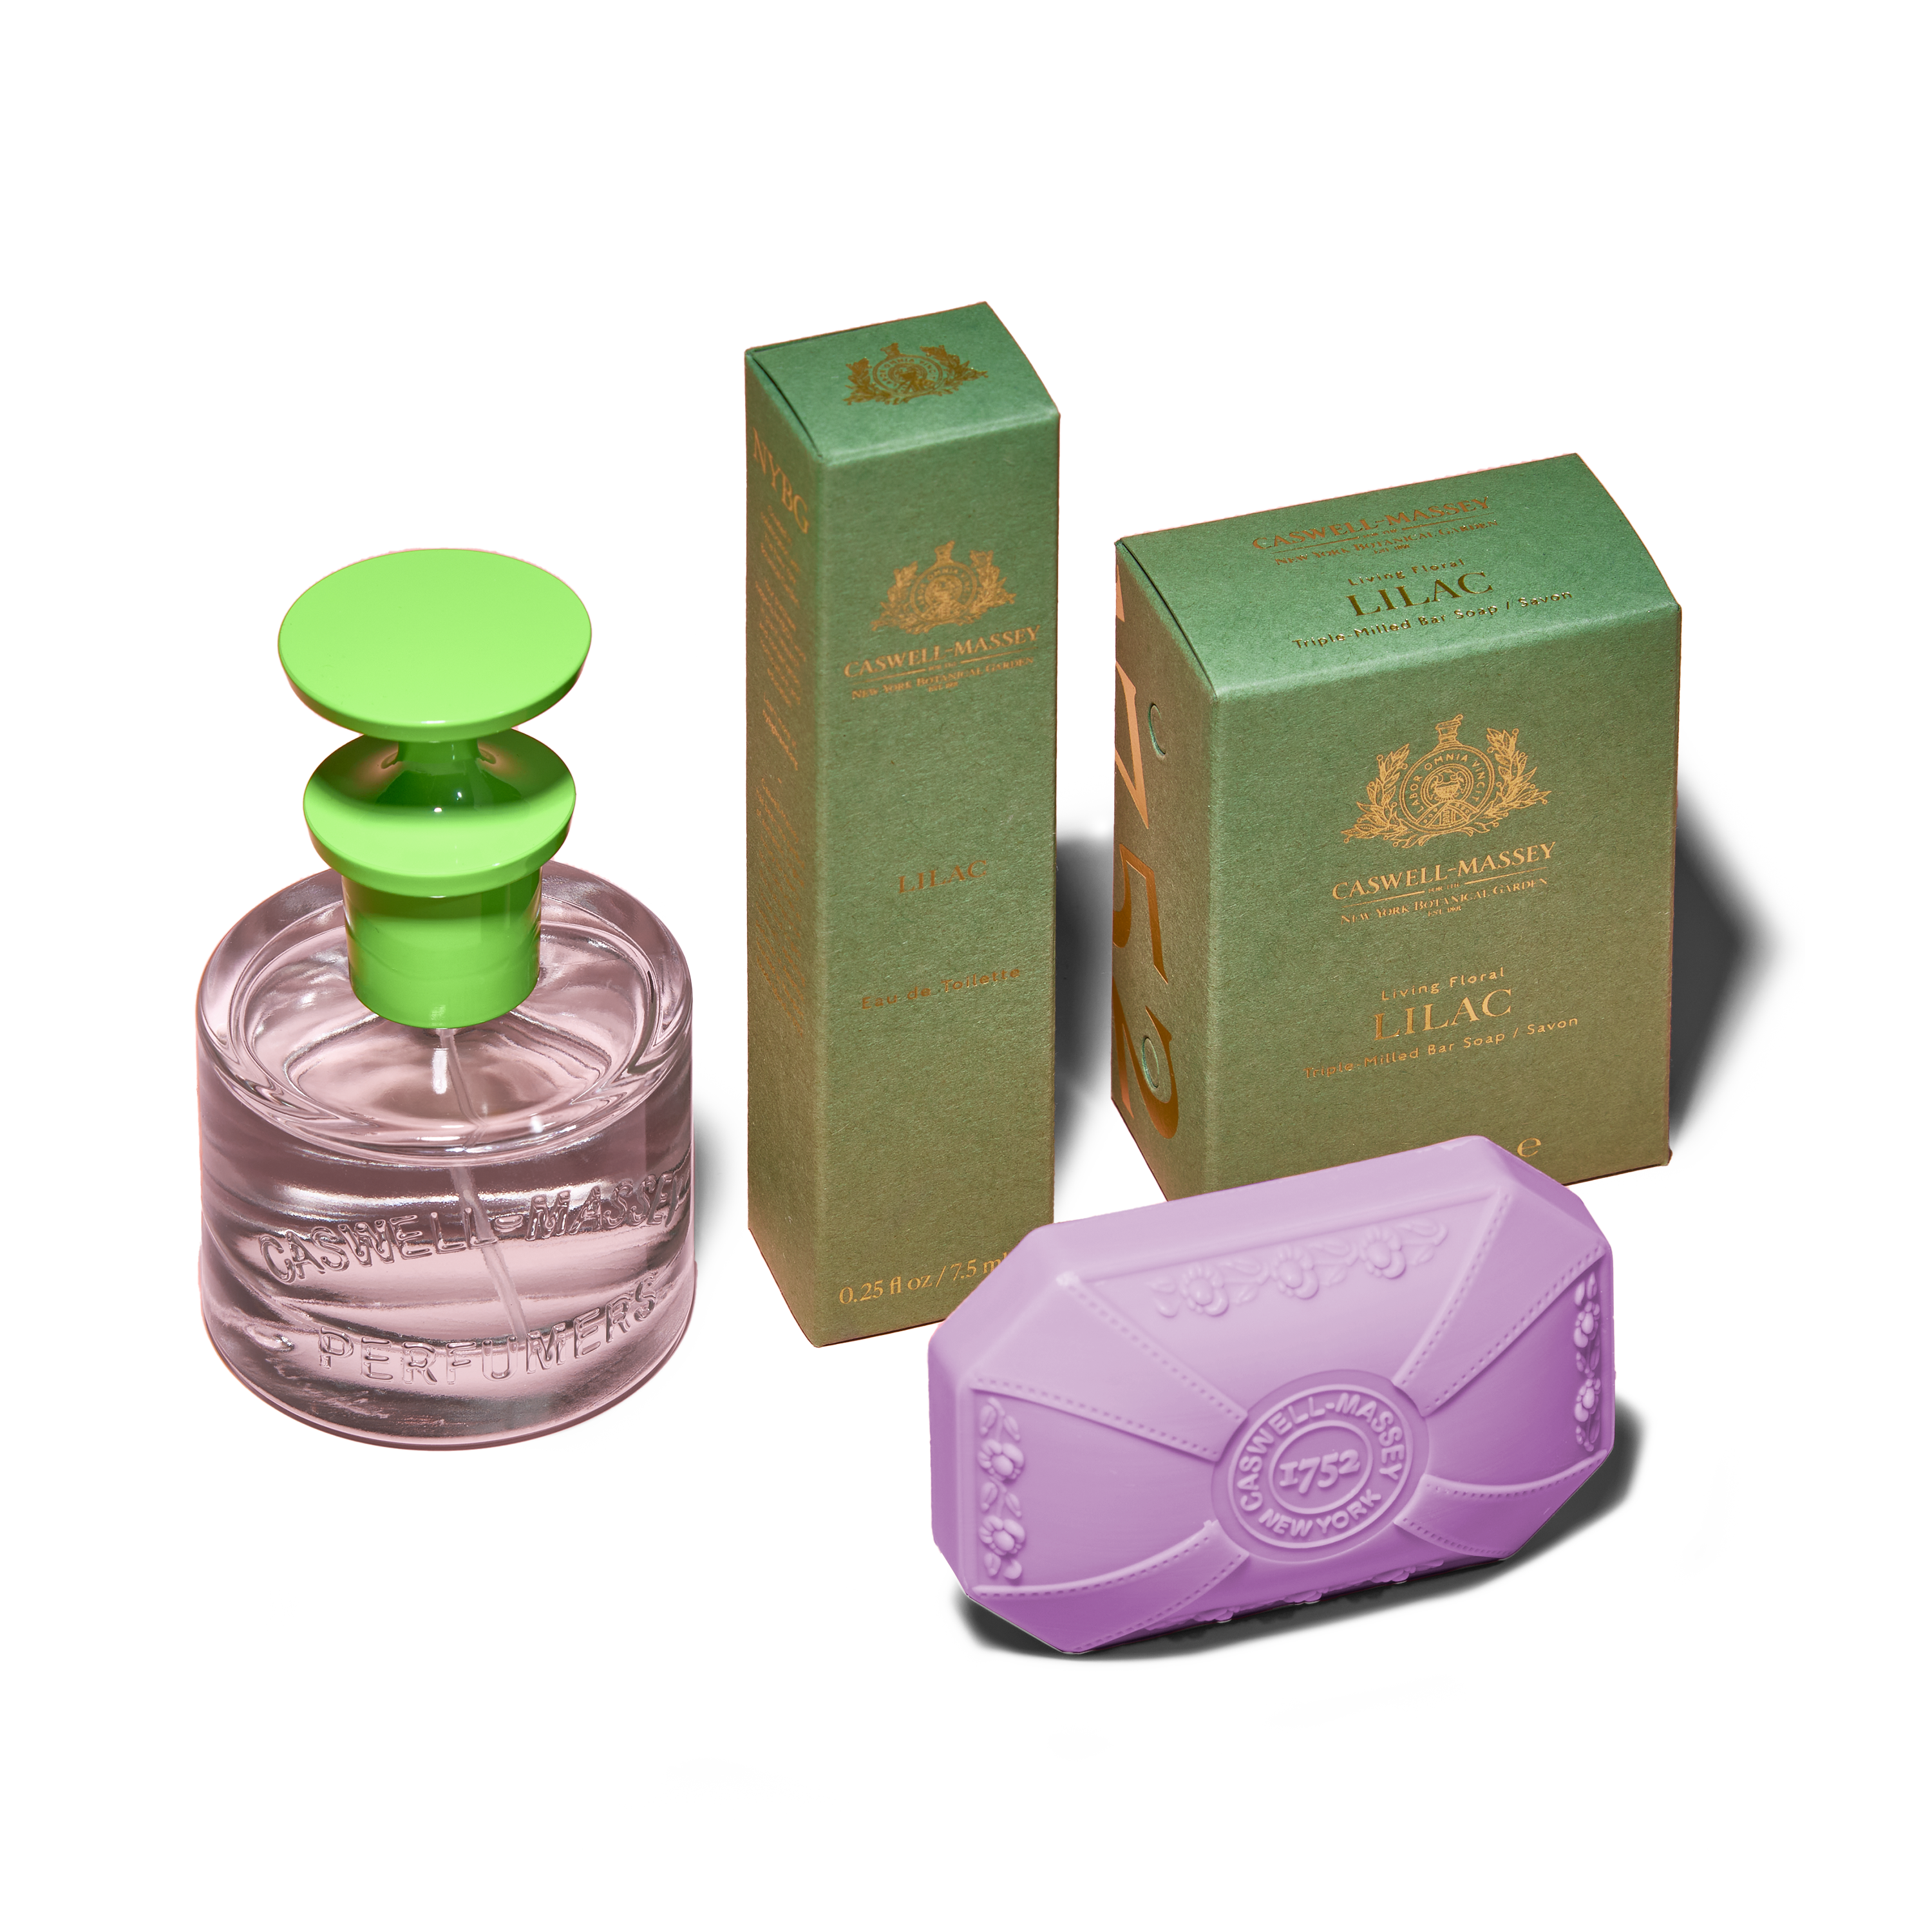 Caswell-Massey Lilac Eau de Toilette: showing full-size 60ml, travel-size 7.5ml, and Lilac Bath Soap